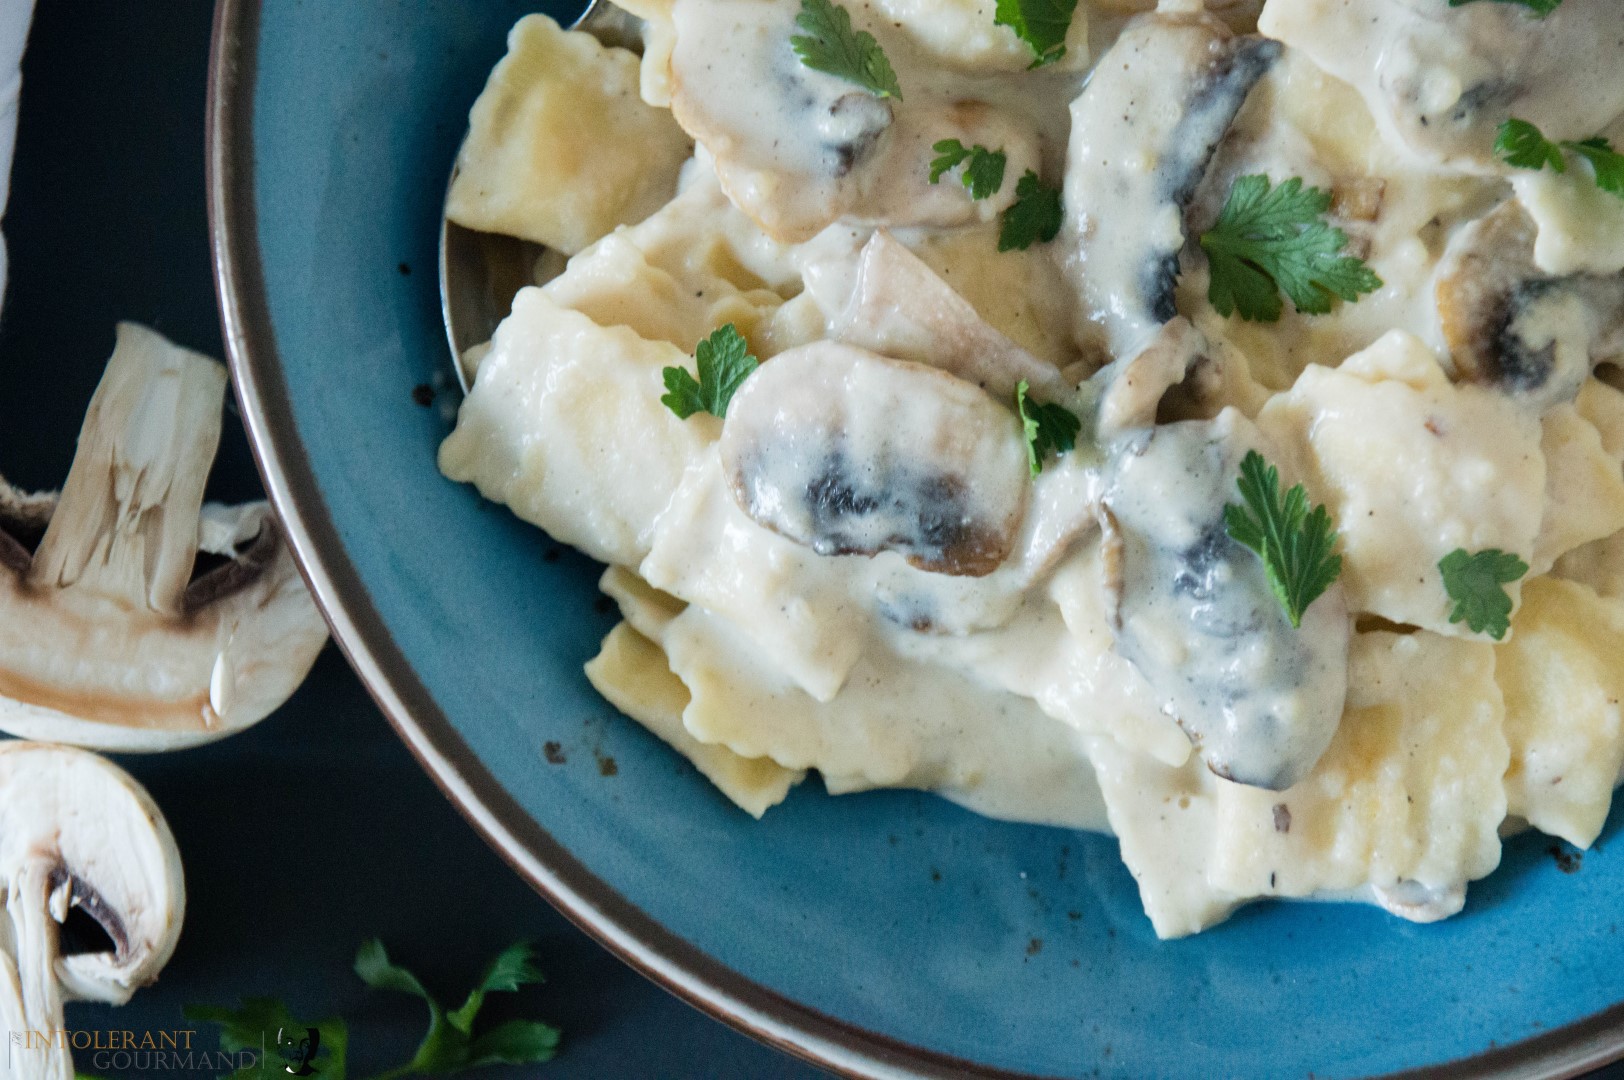 Creamy Mushroom Sauce with Pumpkin Raviolini - the delicious fusion of pumpkin with a creamy comforting sauce to bring you the ultimate bowl of comfort food! Perfect for lunch or dinner and dairy and gluten-free too! www.intolerantgourmand.com